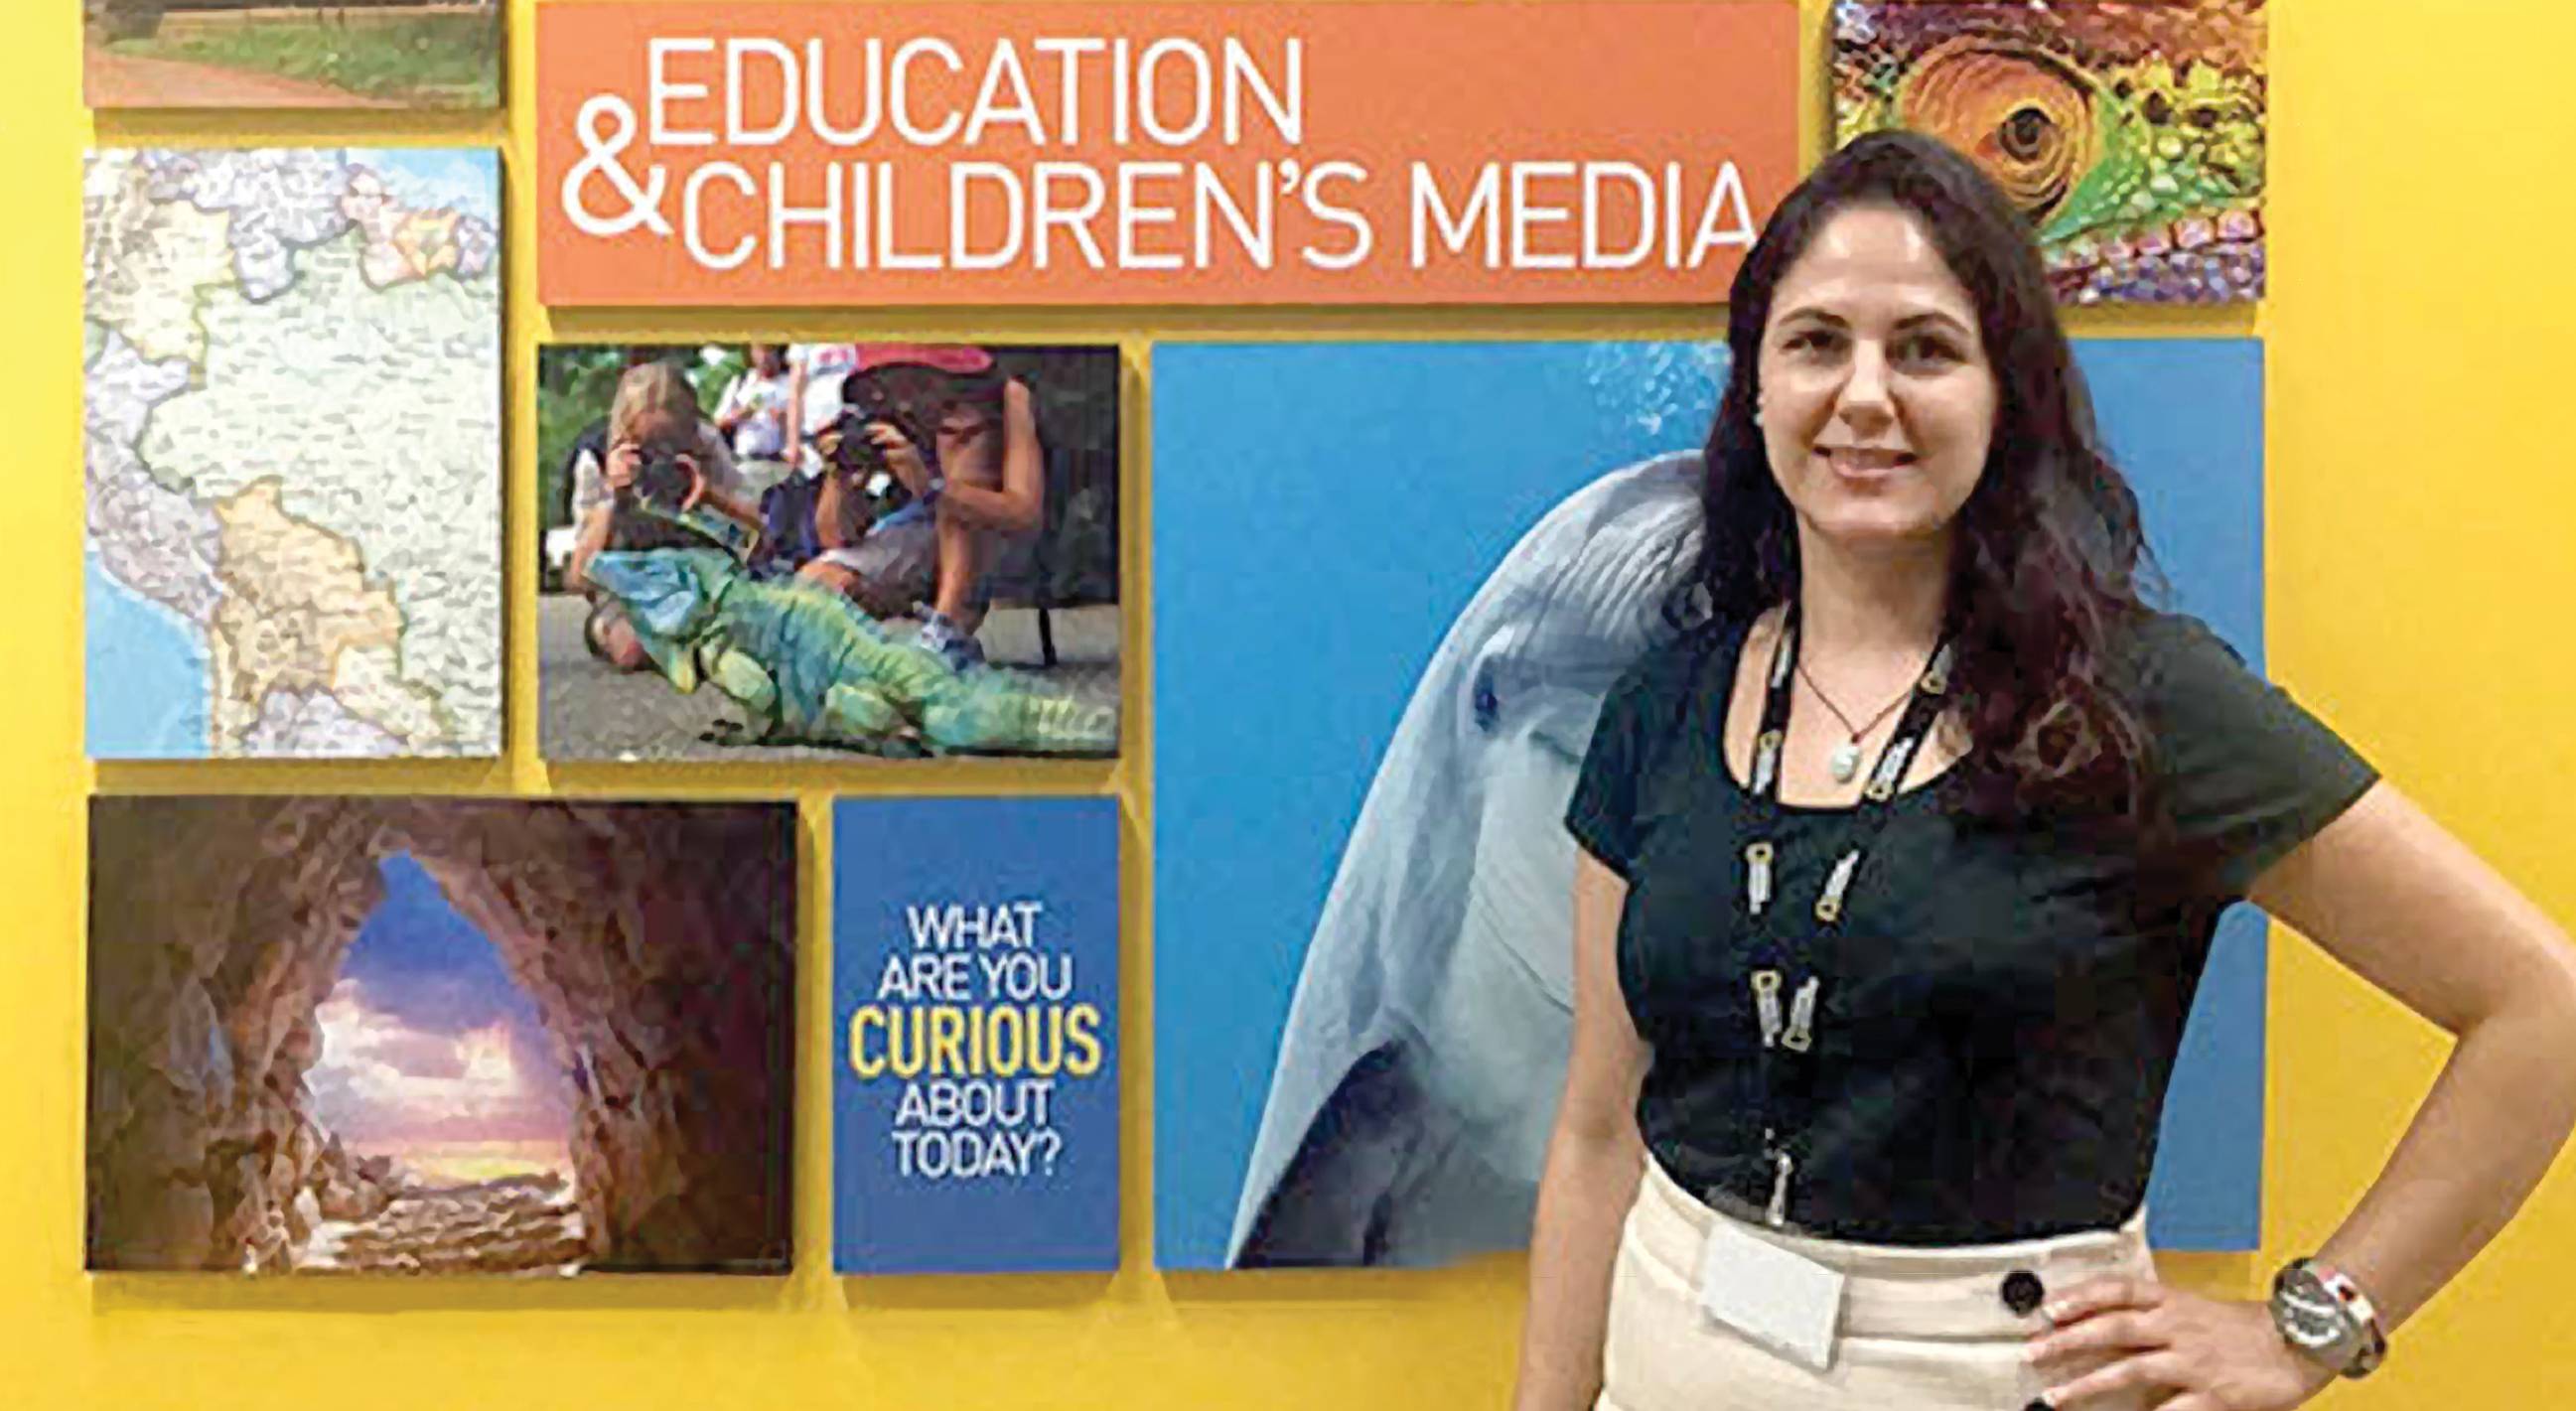 Graciela Sandoval at National Geographic headquarters